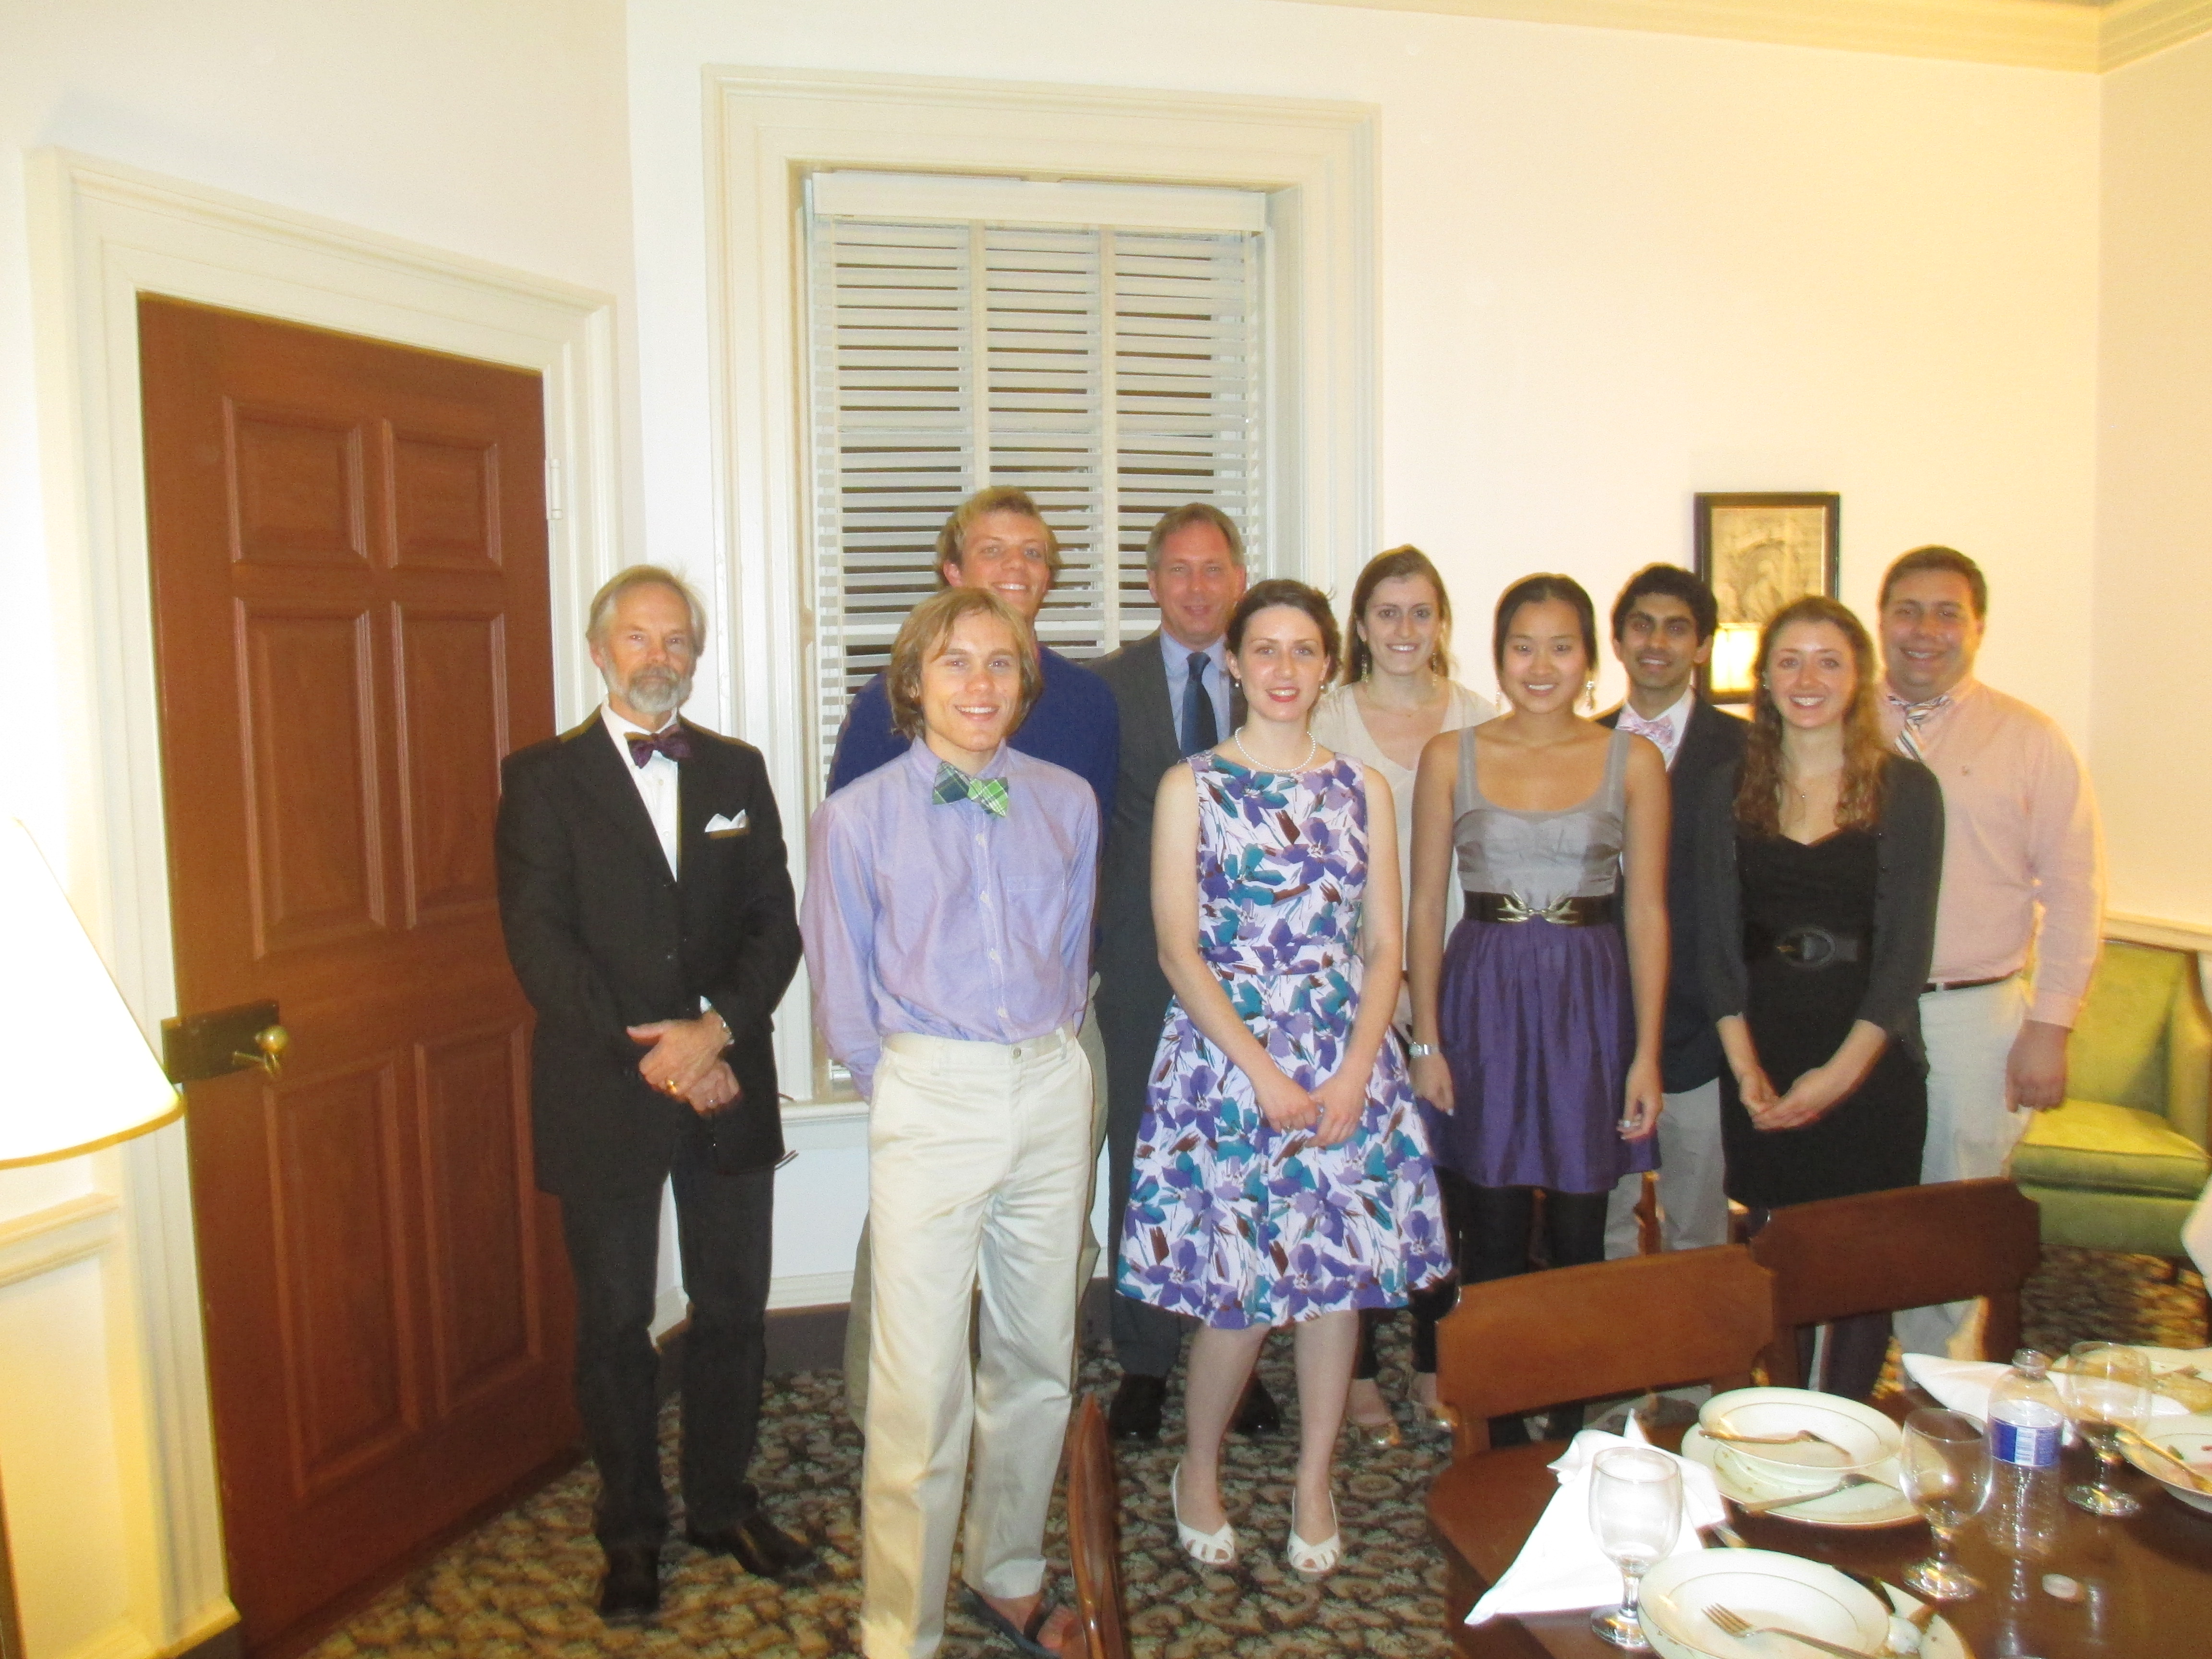 Group photo: Dana Elzy, Ethan Nyberg, Prof. Will Guilford, Bailey Risteen, Pranav Aurora and Alex McGlothlin; in the front row (L-R) are Adam Campbell, Carolyn Jensen, Ellen Zhong and Sydney Schrider